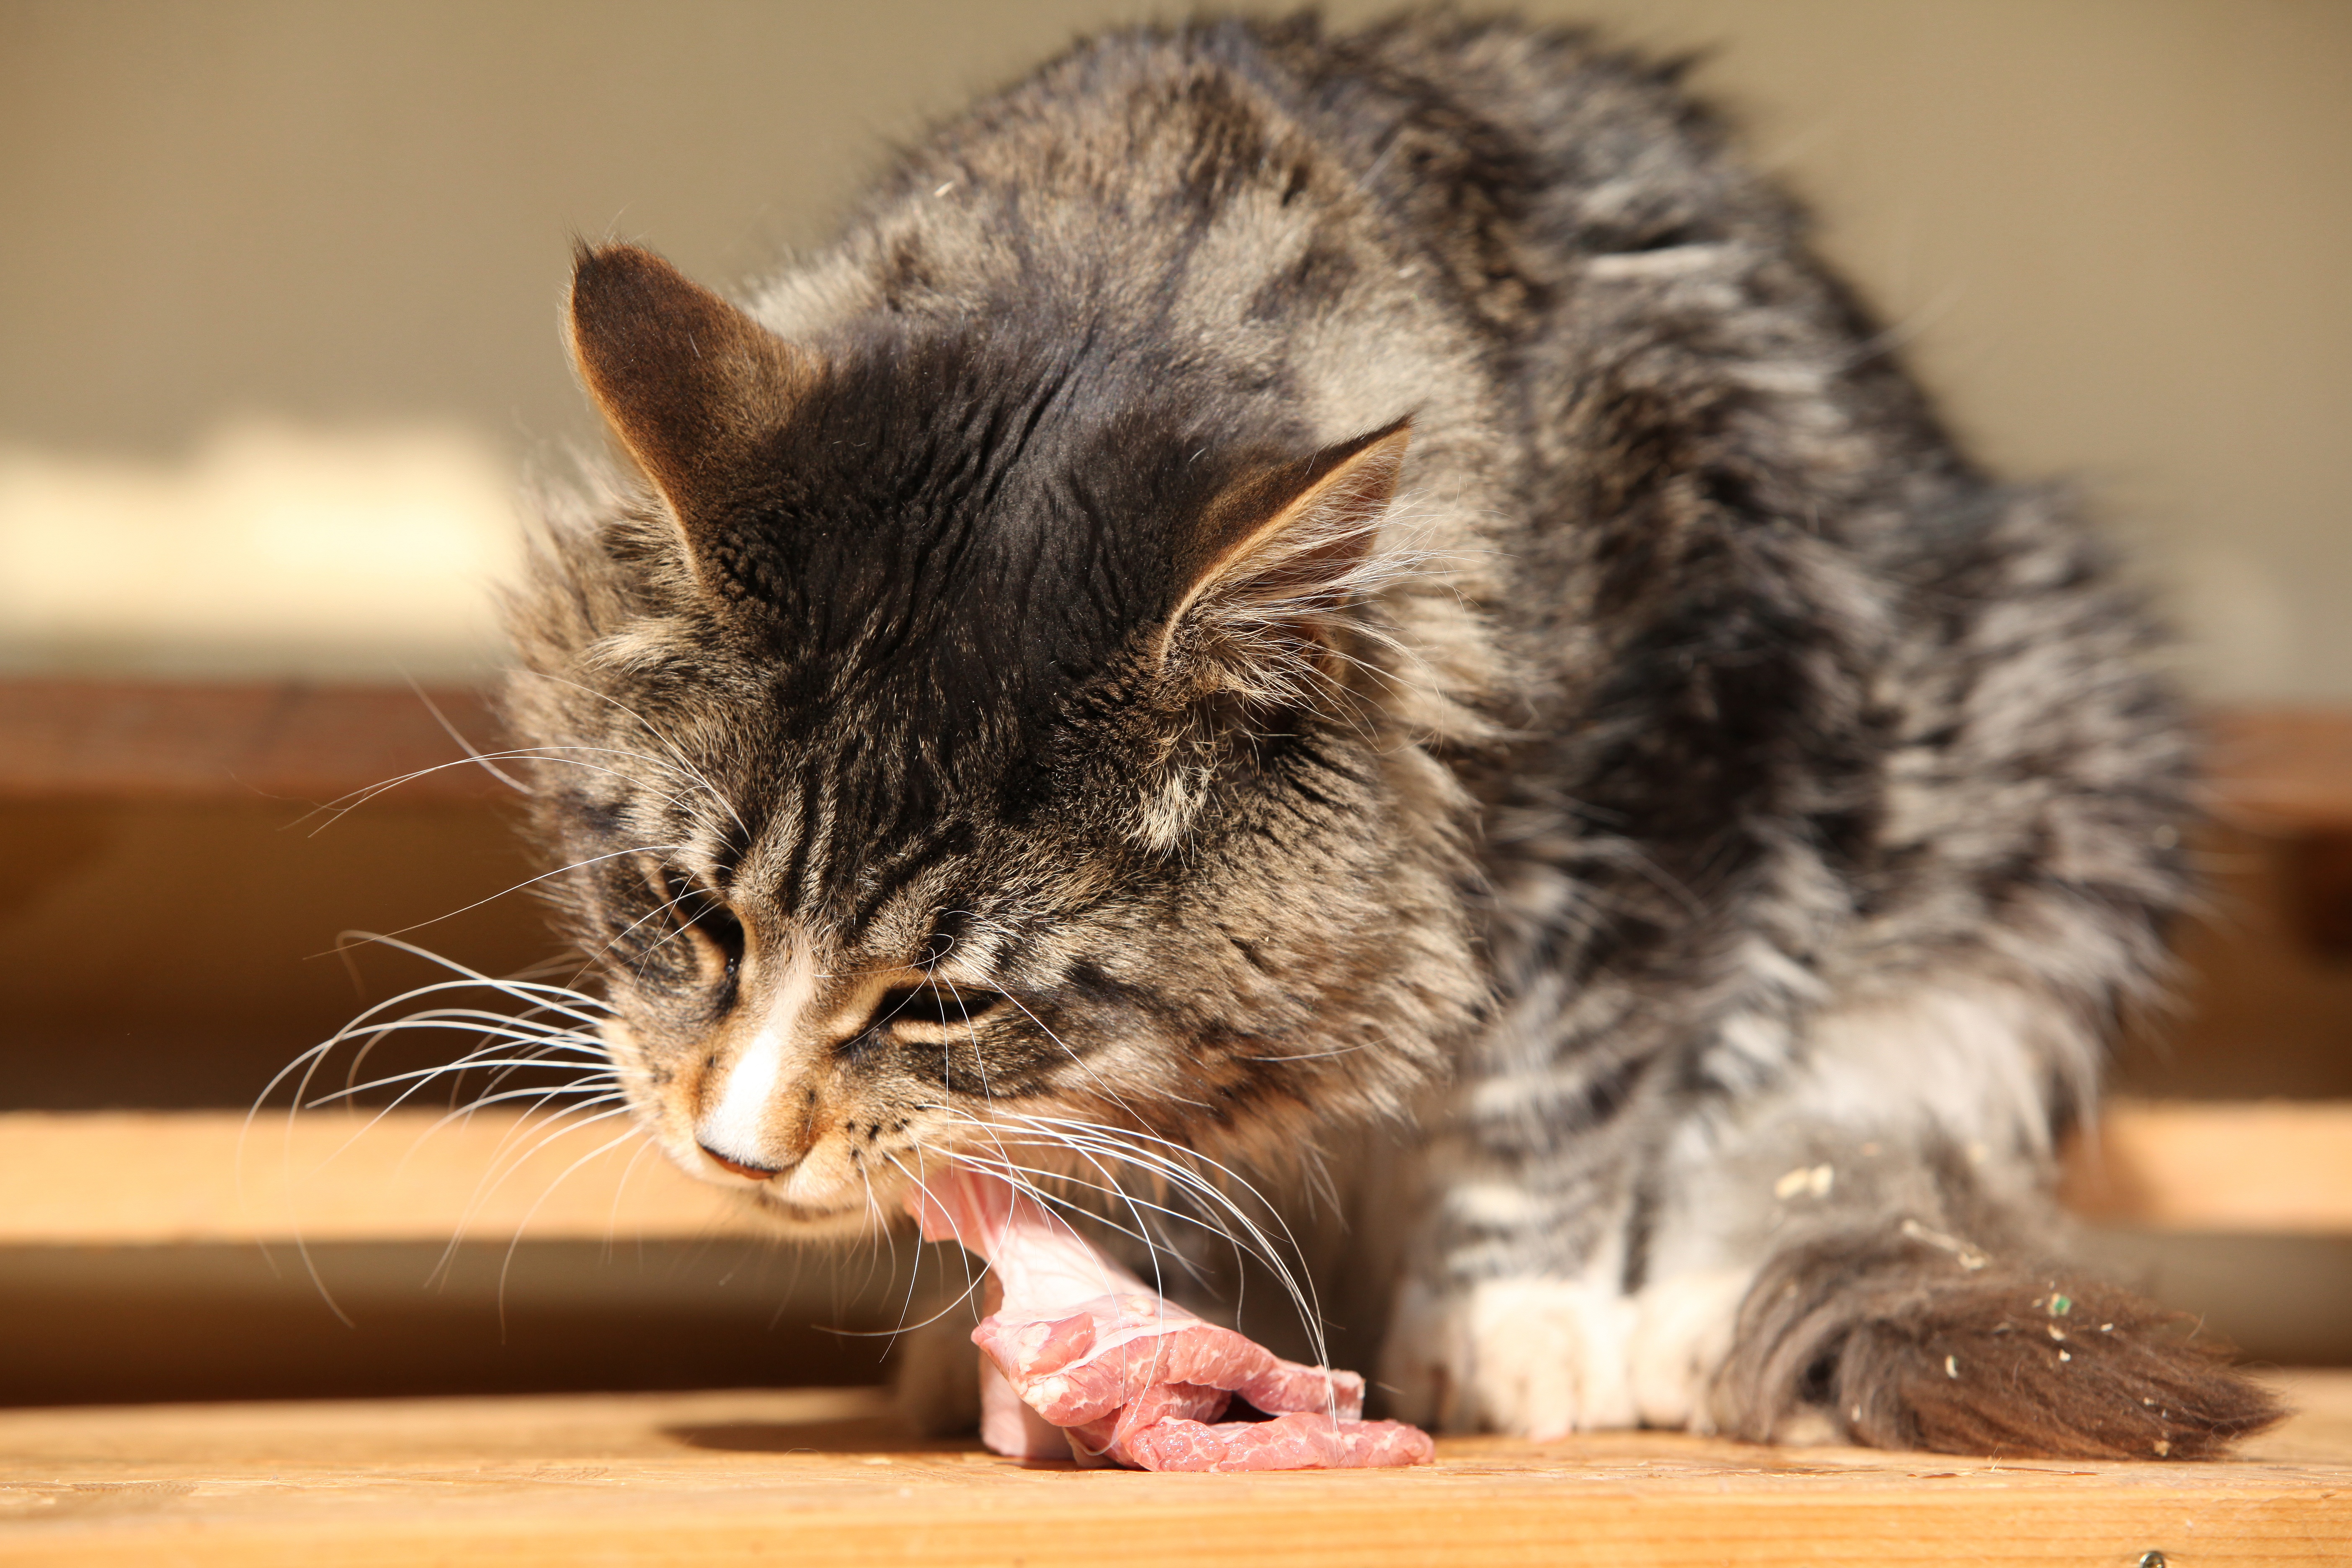 Illnesses that can be avoided in cats by feeding raw foods